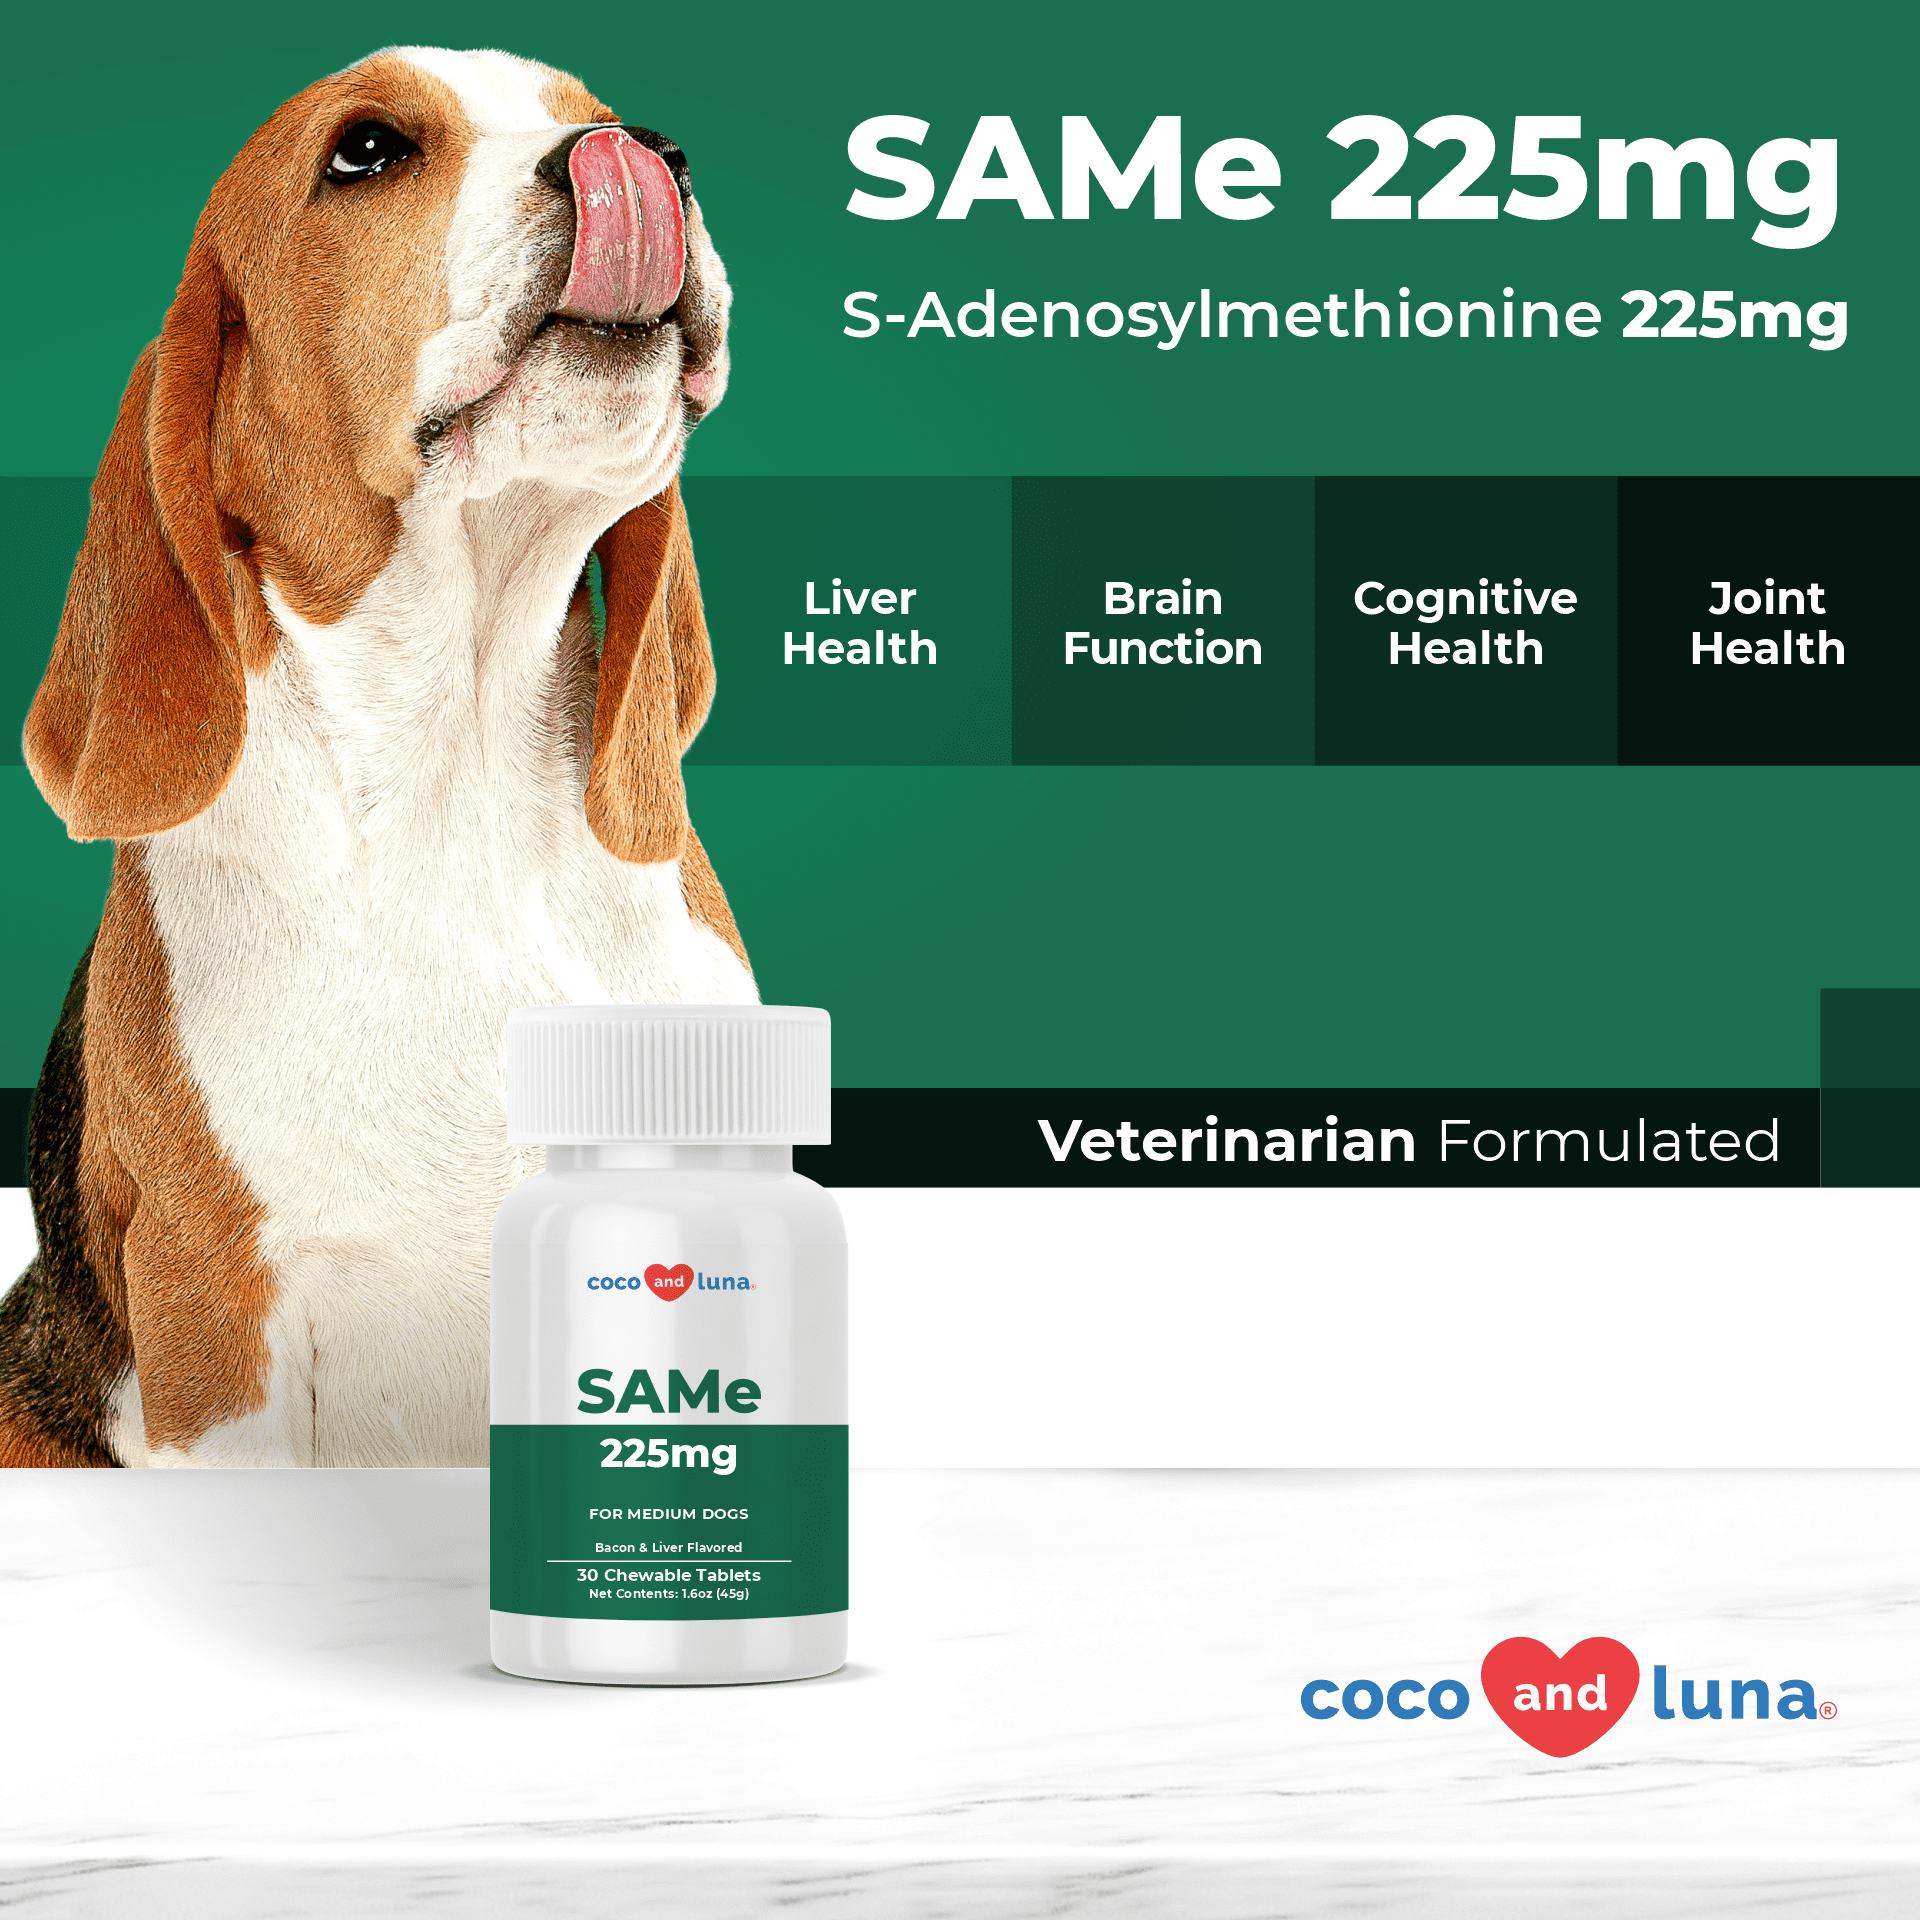 Same for Dogs - S-Adenosyl-L-Methionine, Same 225mg, Liver Supplement for Dogs, Promotes Cognitive Support and Liver Support (Veterinarian Formulated, Medium Dogs)… - Coco and Luna